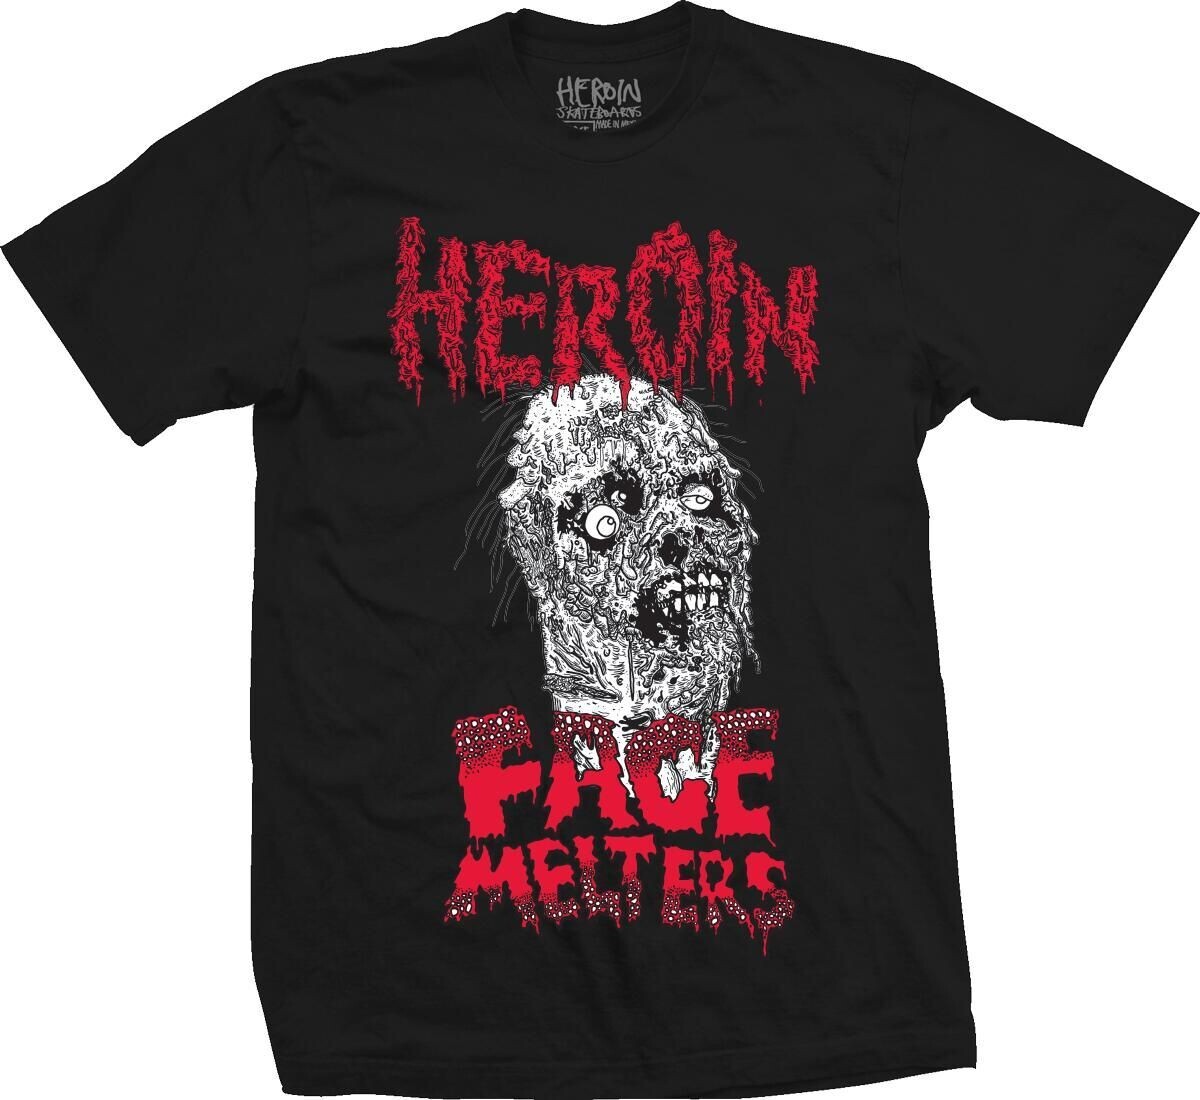 Heroin Face Melters T-Shirt, Size: XL